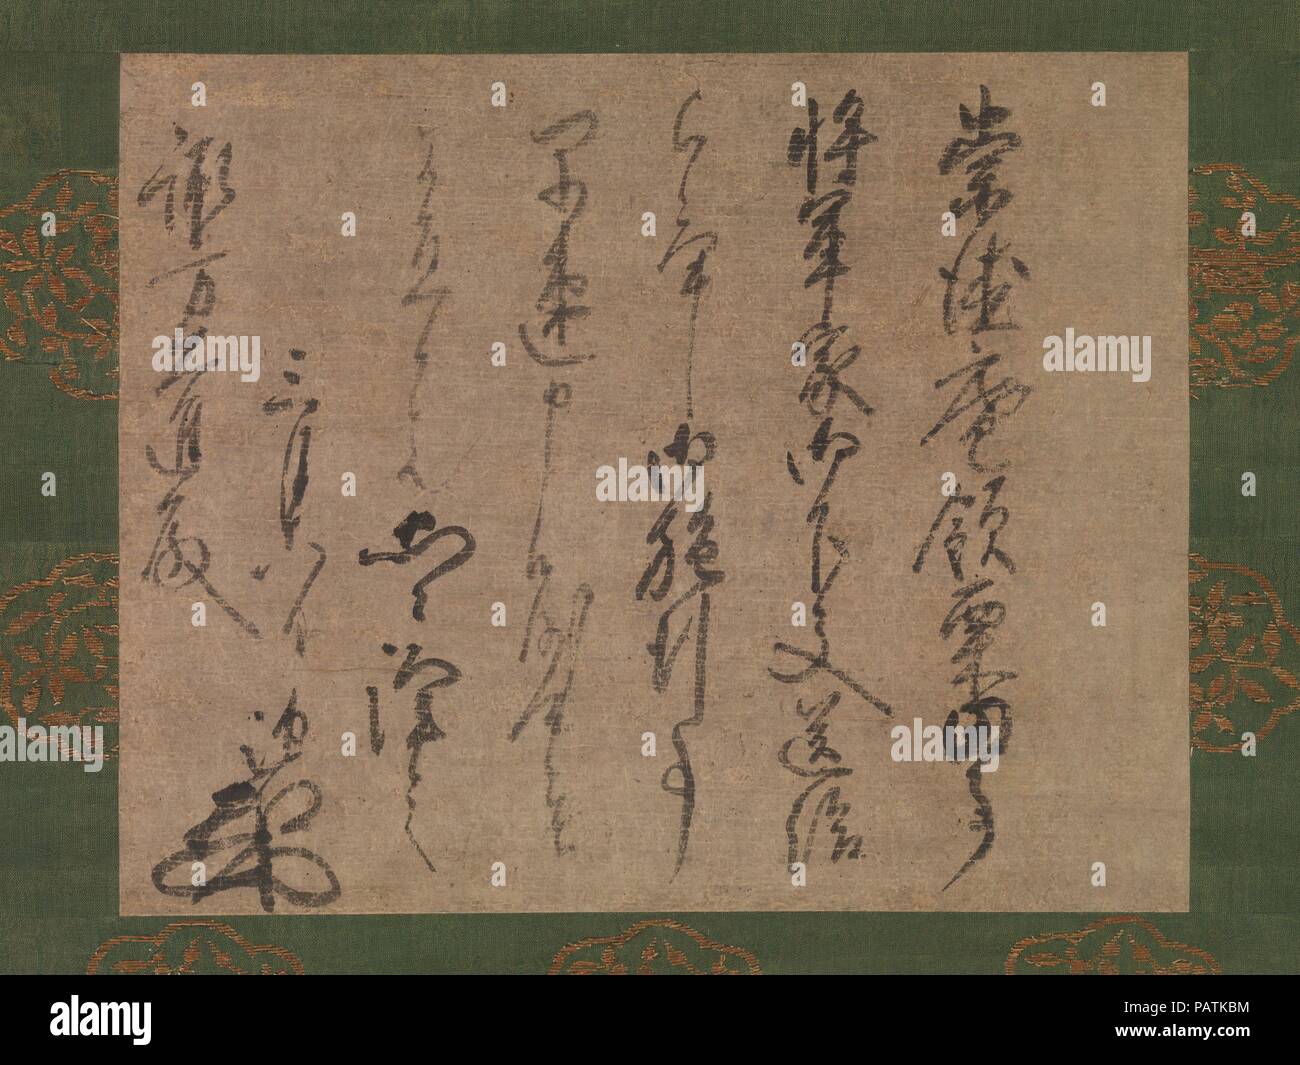 Letter to Suwa Daishin, Officer of the Shogun. Artist: Muso Soseki (Japanese, 1275-1351). Culture: Japan. Dimensions: Image: 11 5/16 × 14 1/16 in. (28.7 × 35.7 cm)  Overall with mounting: 44 1/2 × 18 1/2 in. (113 × 47 cm)  Overall with knobs: 44 1/2 × 20 1/4 in. (113 × 51.4 cm). Date: ca. 1339-51.  The letter, composed in formal Chinese, is brushed in a brusque but crisp, elegant, and legible style appropriate for correspondence between men of high social status. The Rinzai Zen monk's handwritten seal (kao) adds a touch of scribal flair to the perfunctory administrative message. Though it lack Stock Photo